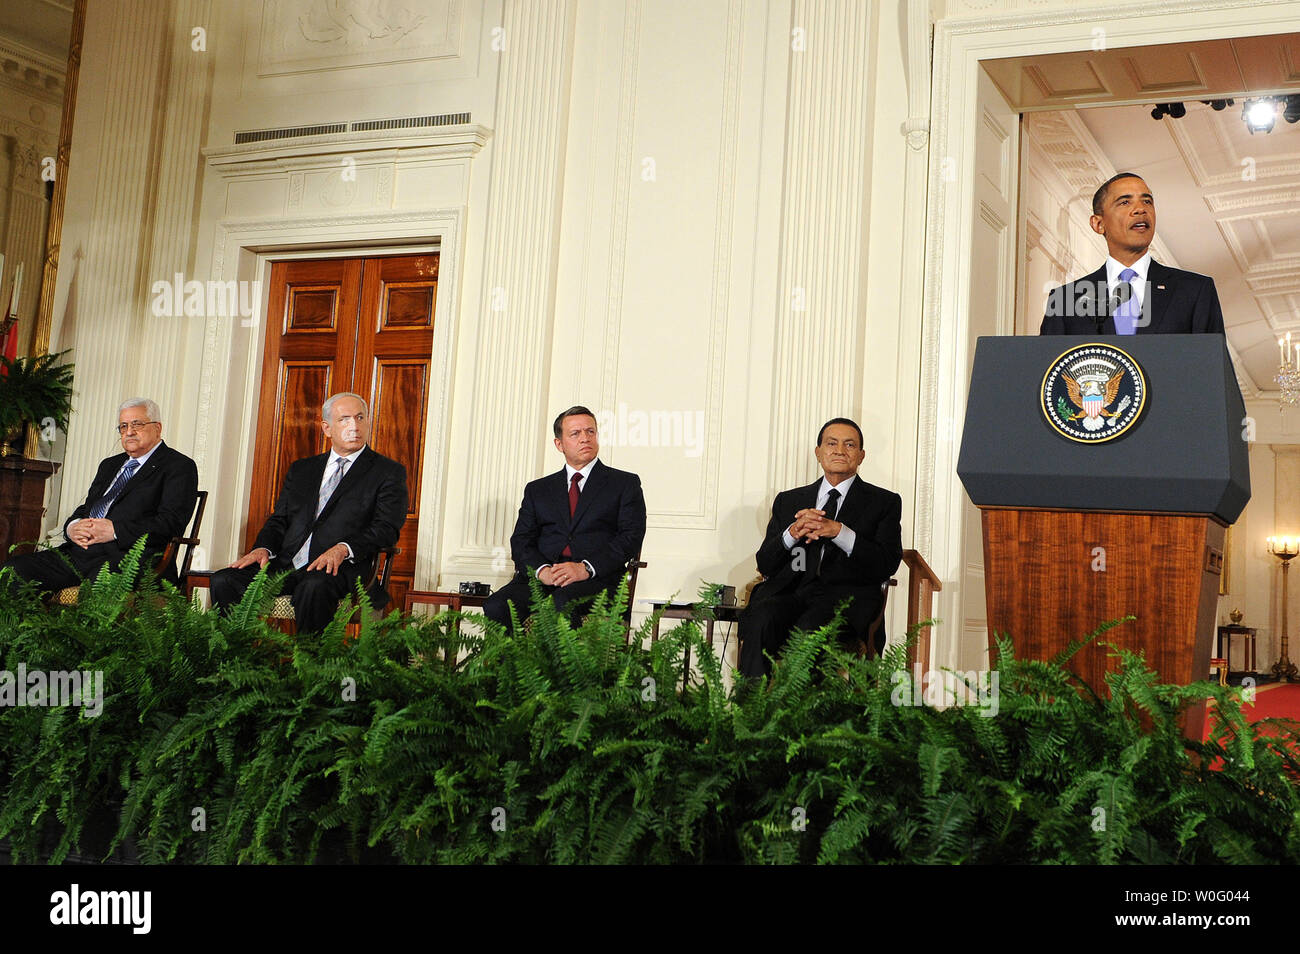 President Barack Obama delivers remarks alongside, President Hosni Mubarak of Egypt, King Abdullah II of Jordan, Prime Minister Benjamin Netanyahu of Israel and Palestinian Authority President Mahmoud Abbas after a series of meetings at the White House in Washington on September 1, 2010. Tomorrow begins the first direct peace talks in two years between Israel and the Palestinian Authority scheduled to begin at the State Department in Washington, D.C. UPI/Kevin Dietsch Stock Photo